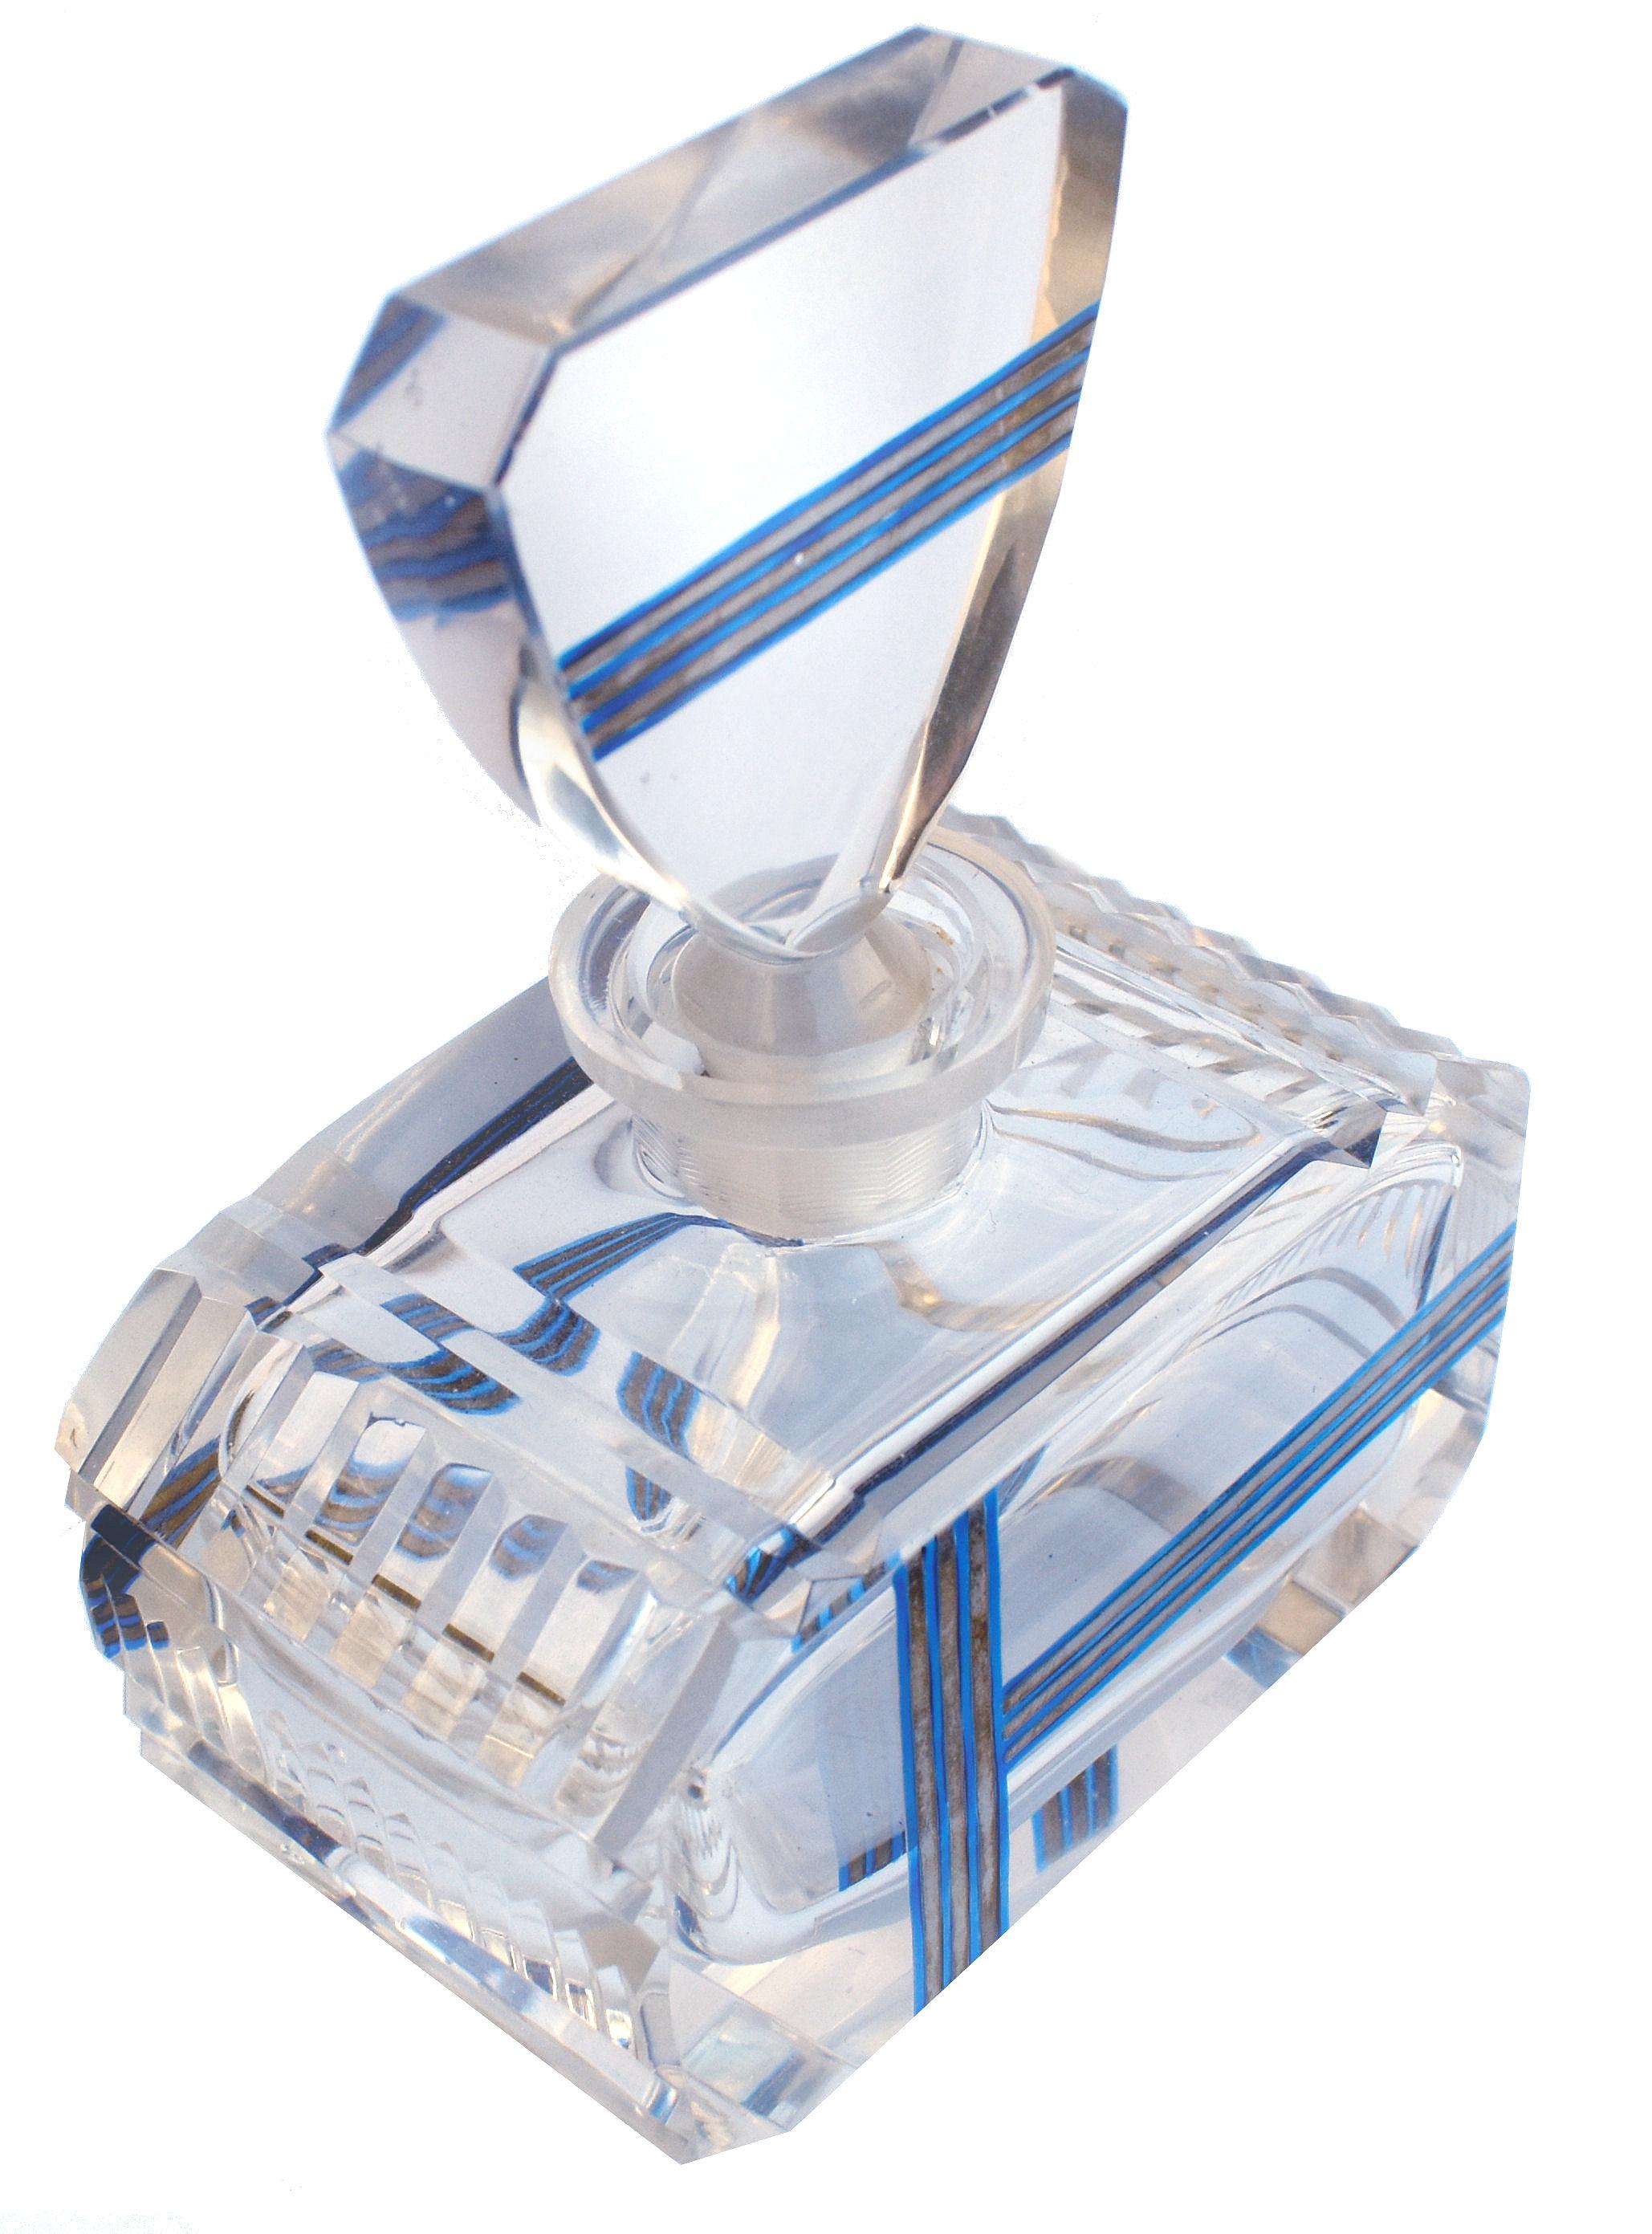 French Art Deco 1930's Glass and Chrome Perfume Atomizer Bottle For Sale